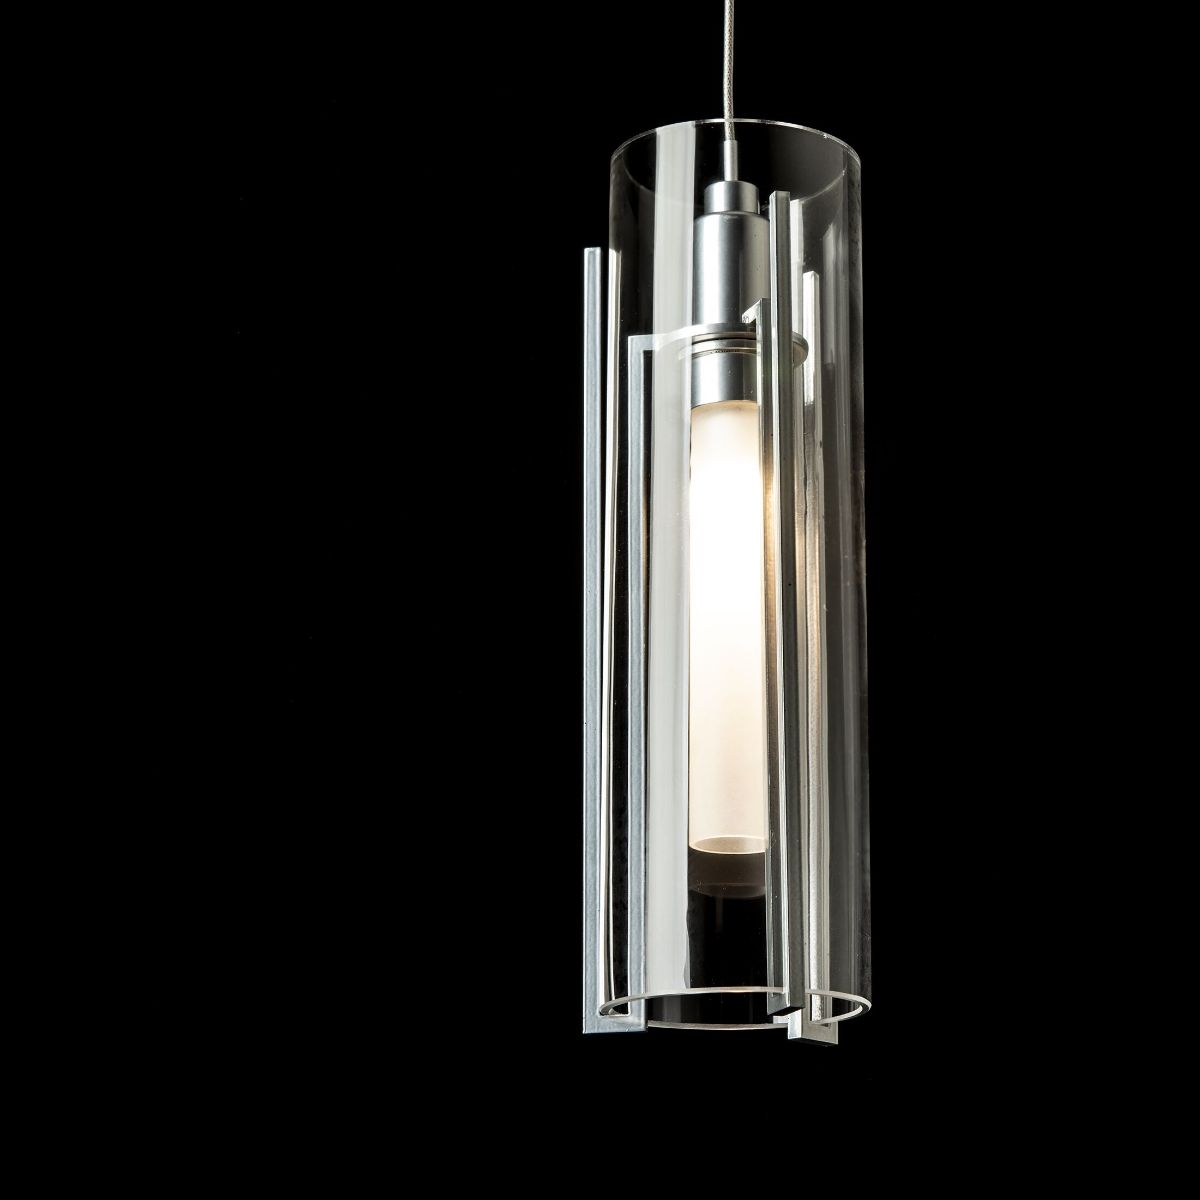 Exos 45 in. 10 Lights Linear Pendant Light with Long Height